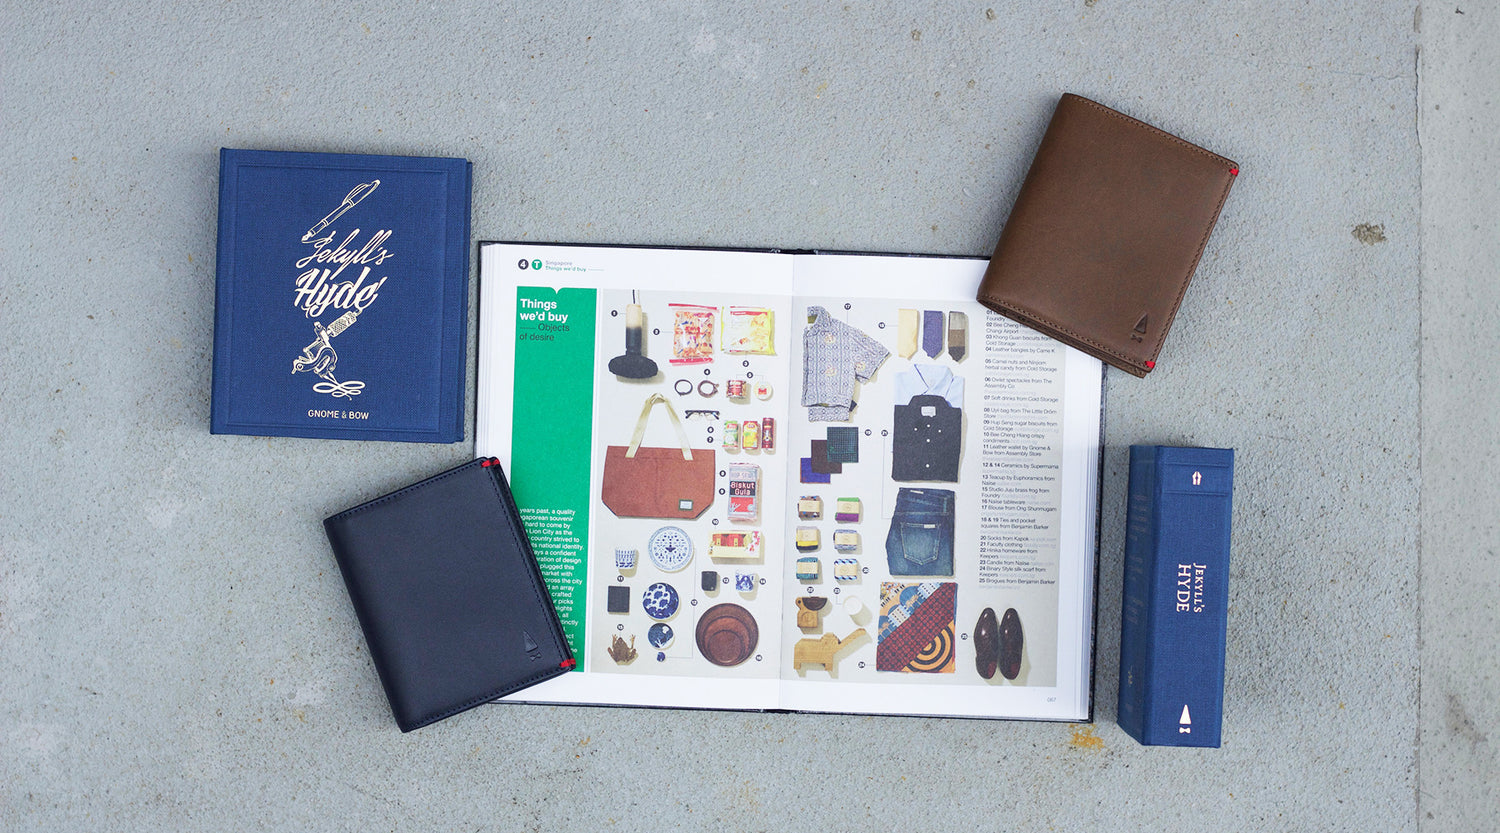 1st Jul 2016 |Things we’d buy – Objects of desire (The MONOCLE Travel Guide Series, Singapore)